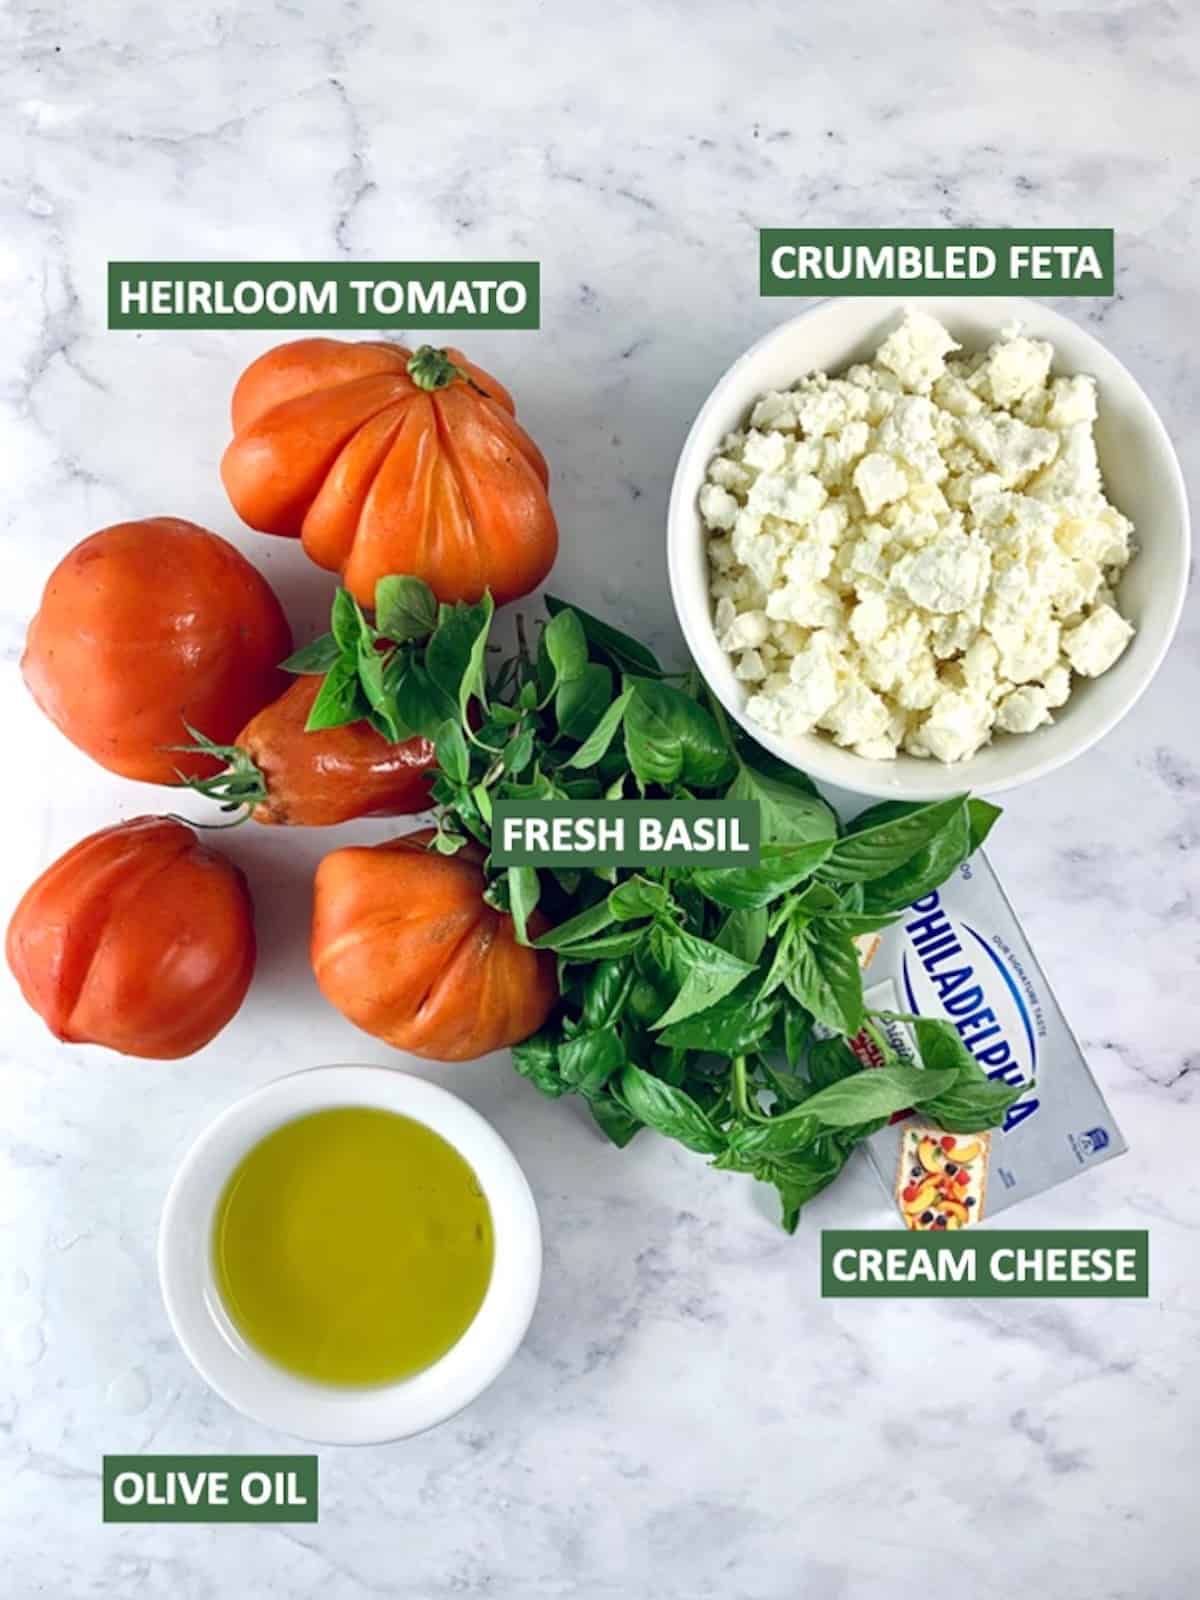 Labelled ingredients needed to make heirloom tomato salad.